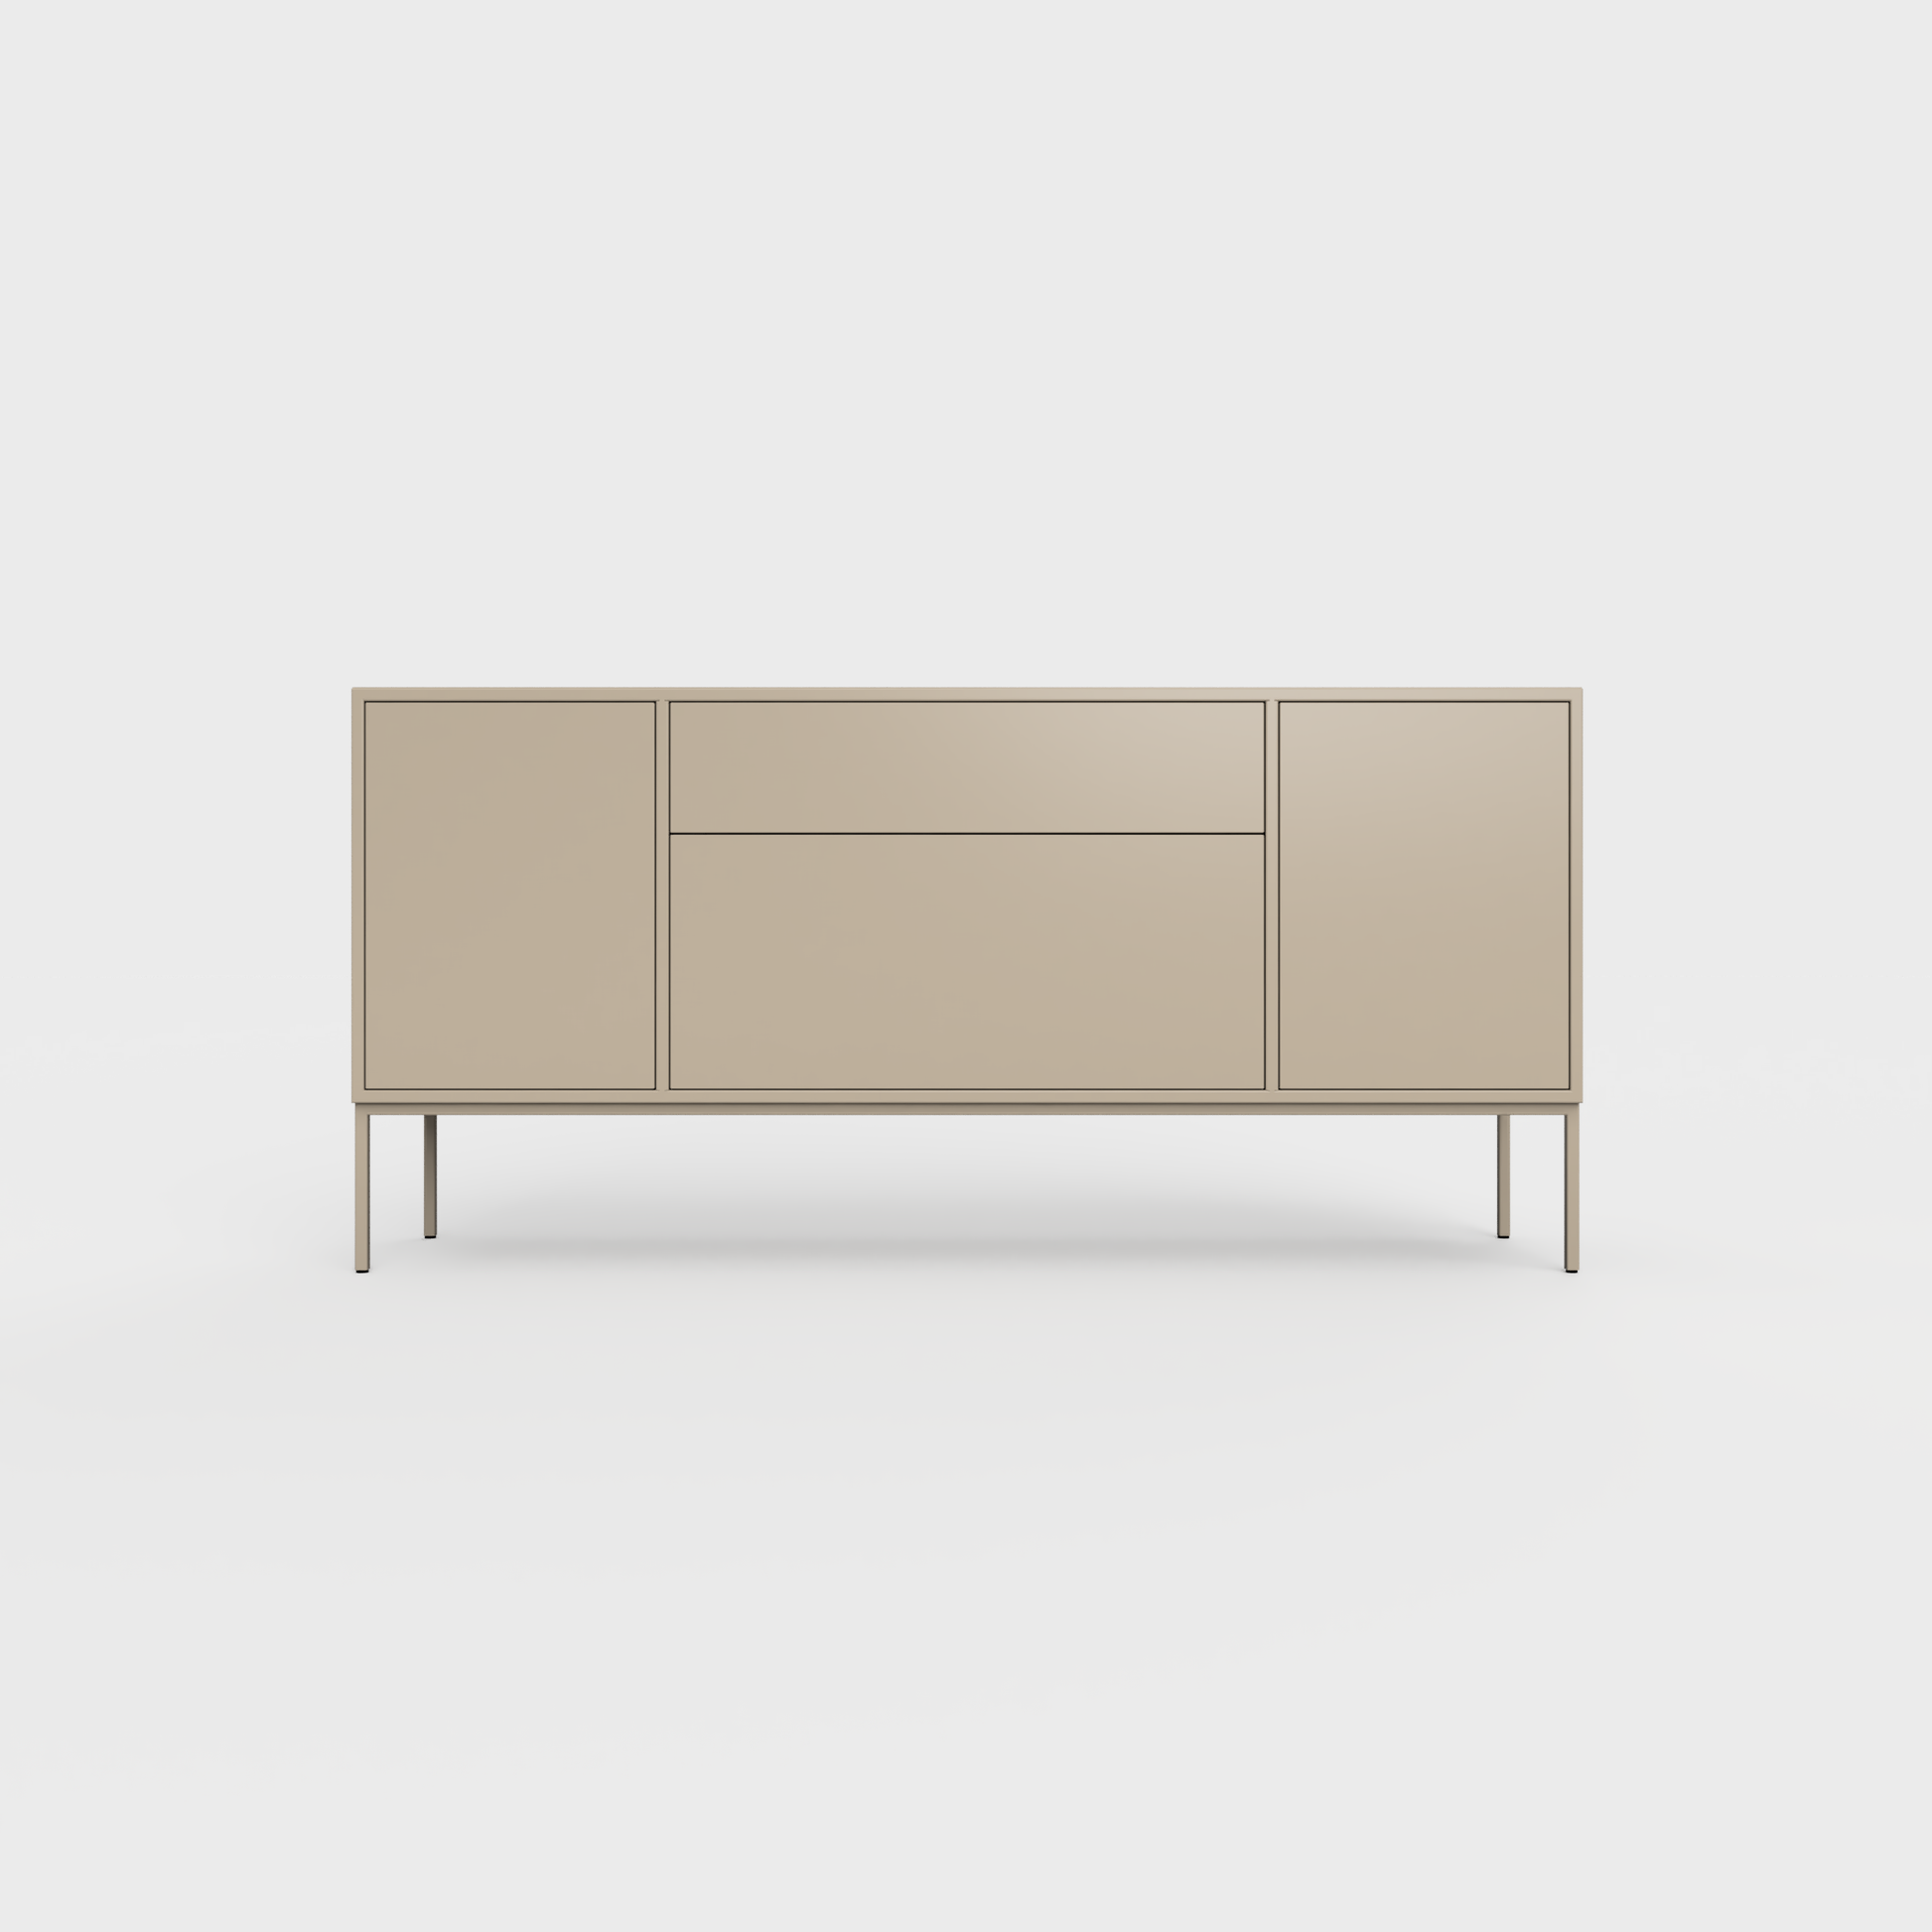 Arnika 02 Sideboard in Khaki color, powder-coated steel, elegant and modern piece of furniture for your living room